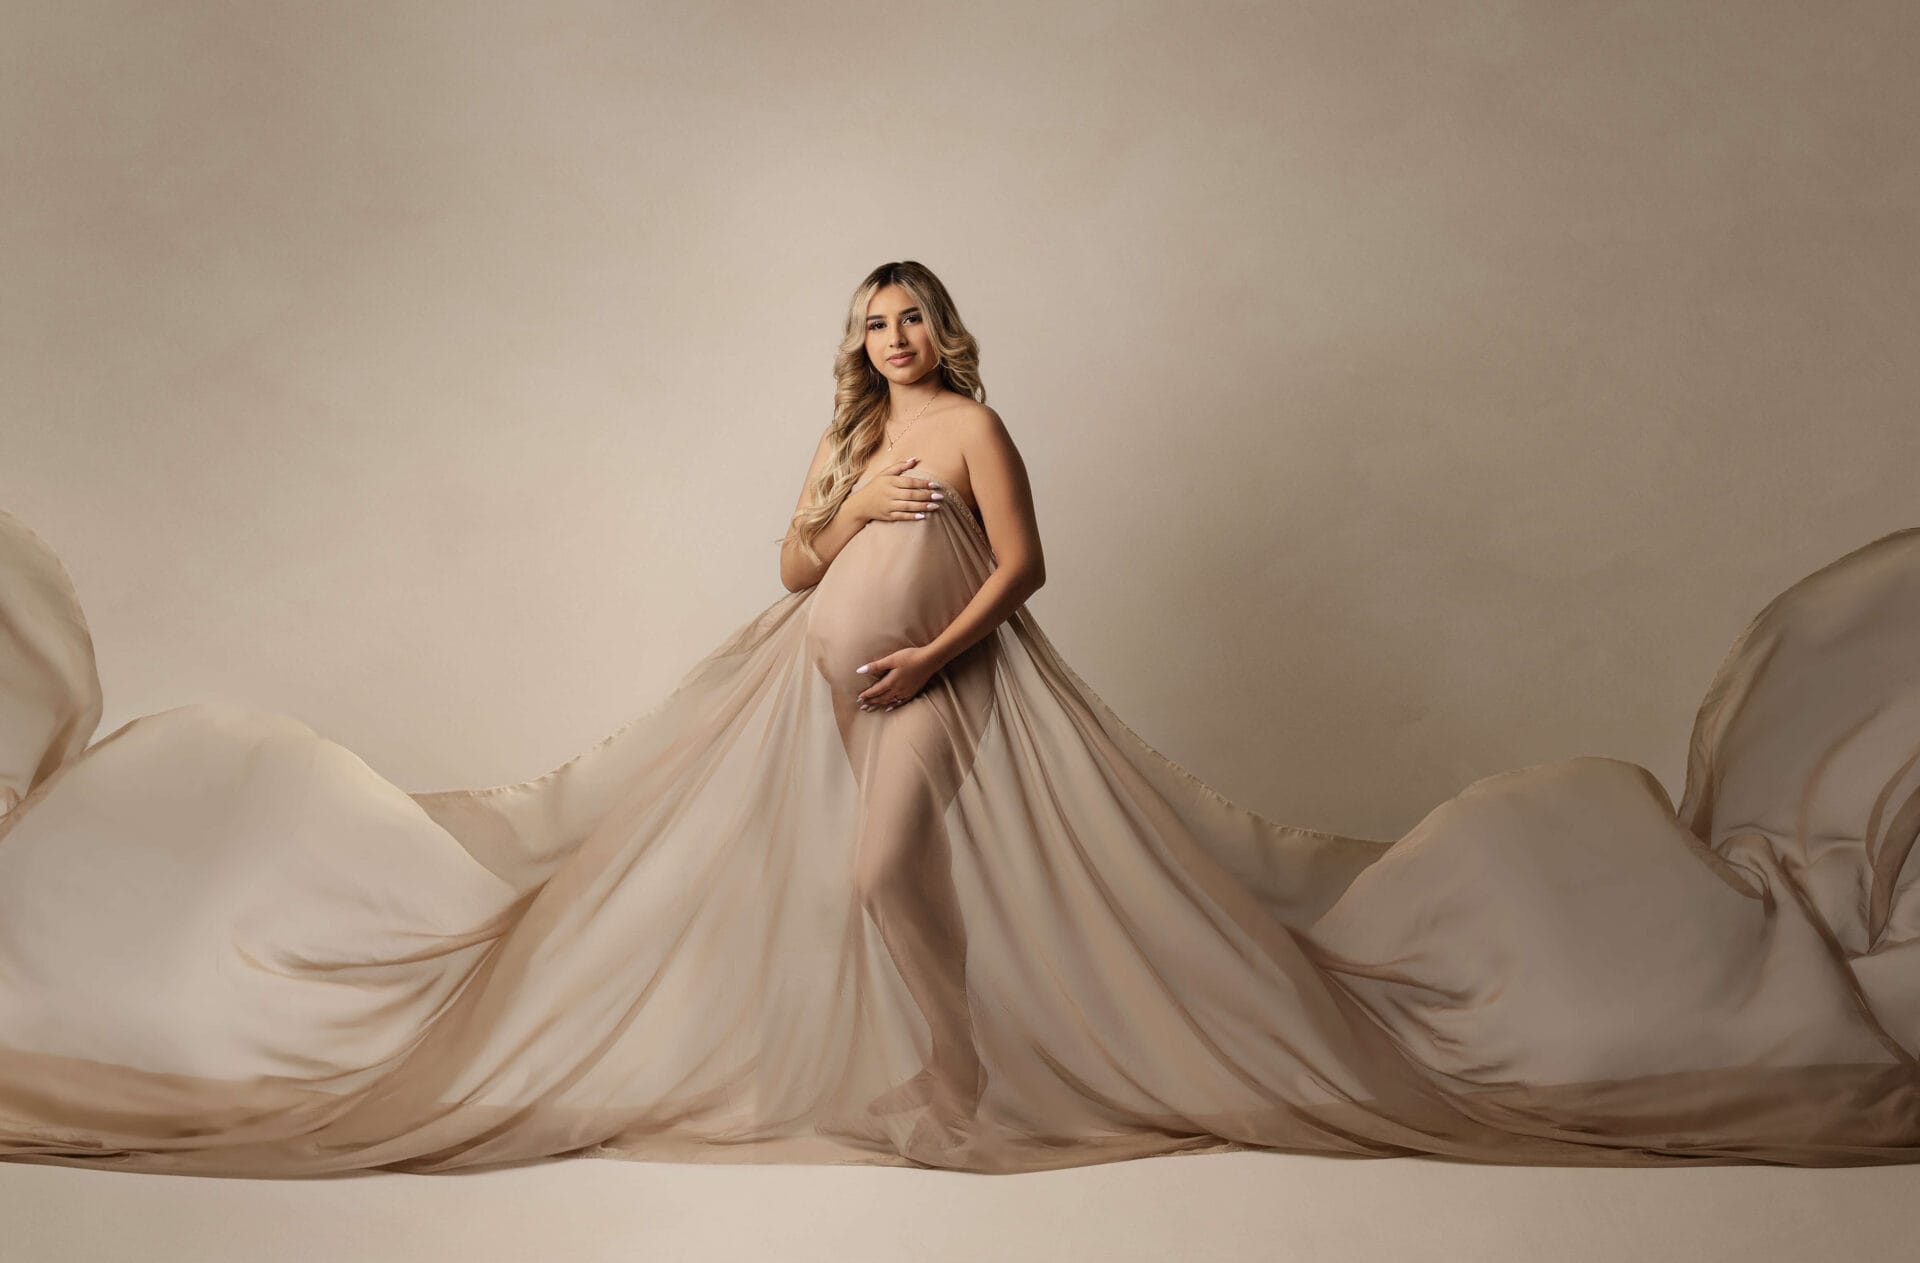 A pregnant mom is to be in the studio with fabric draped, embracing her baby bump. 